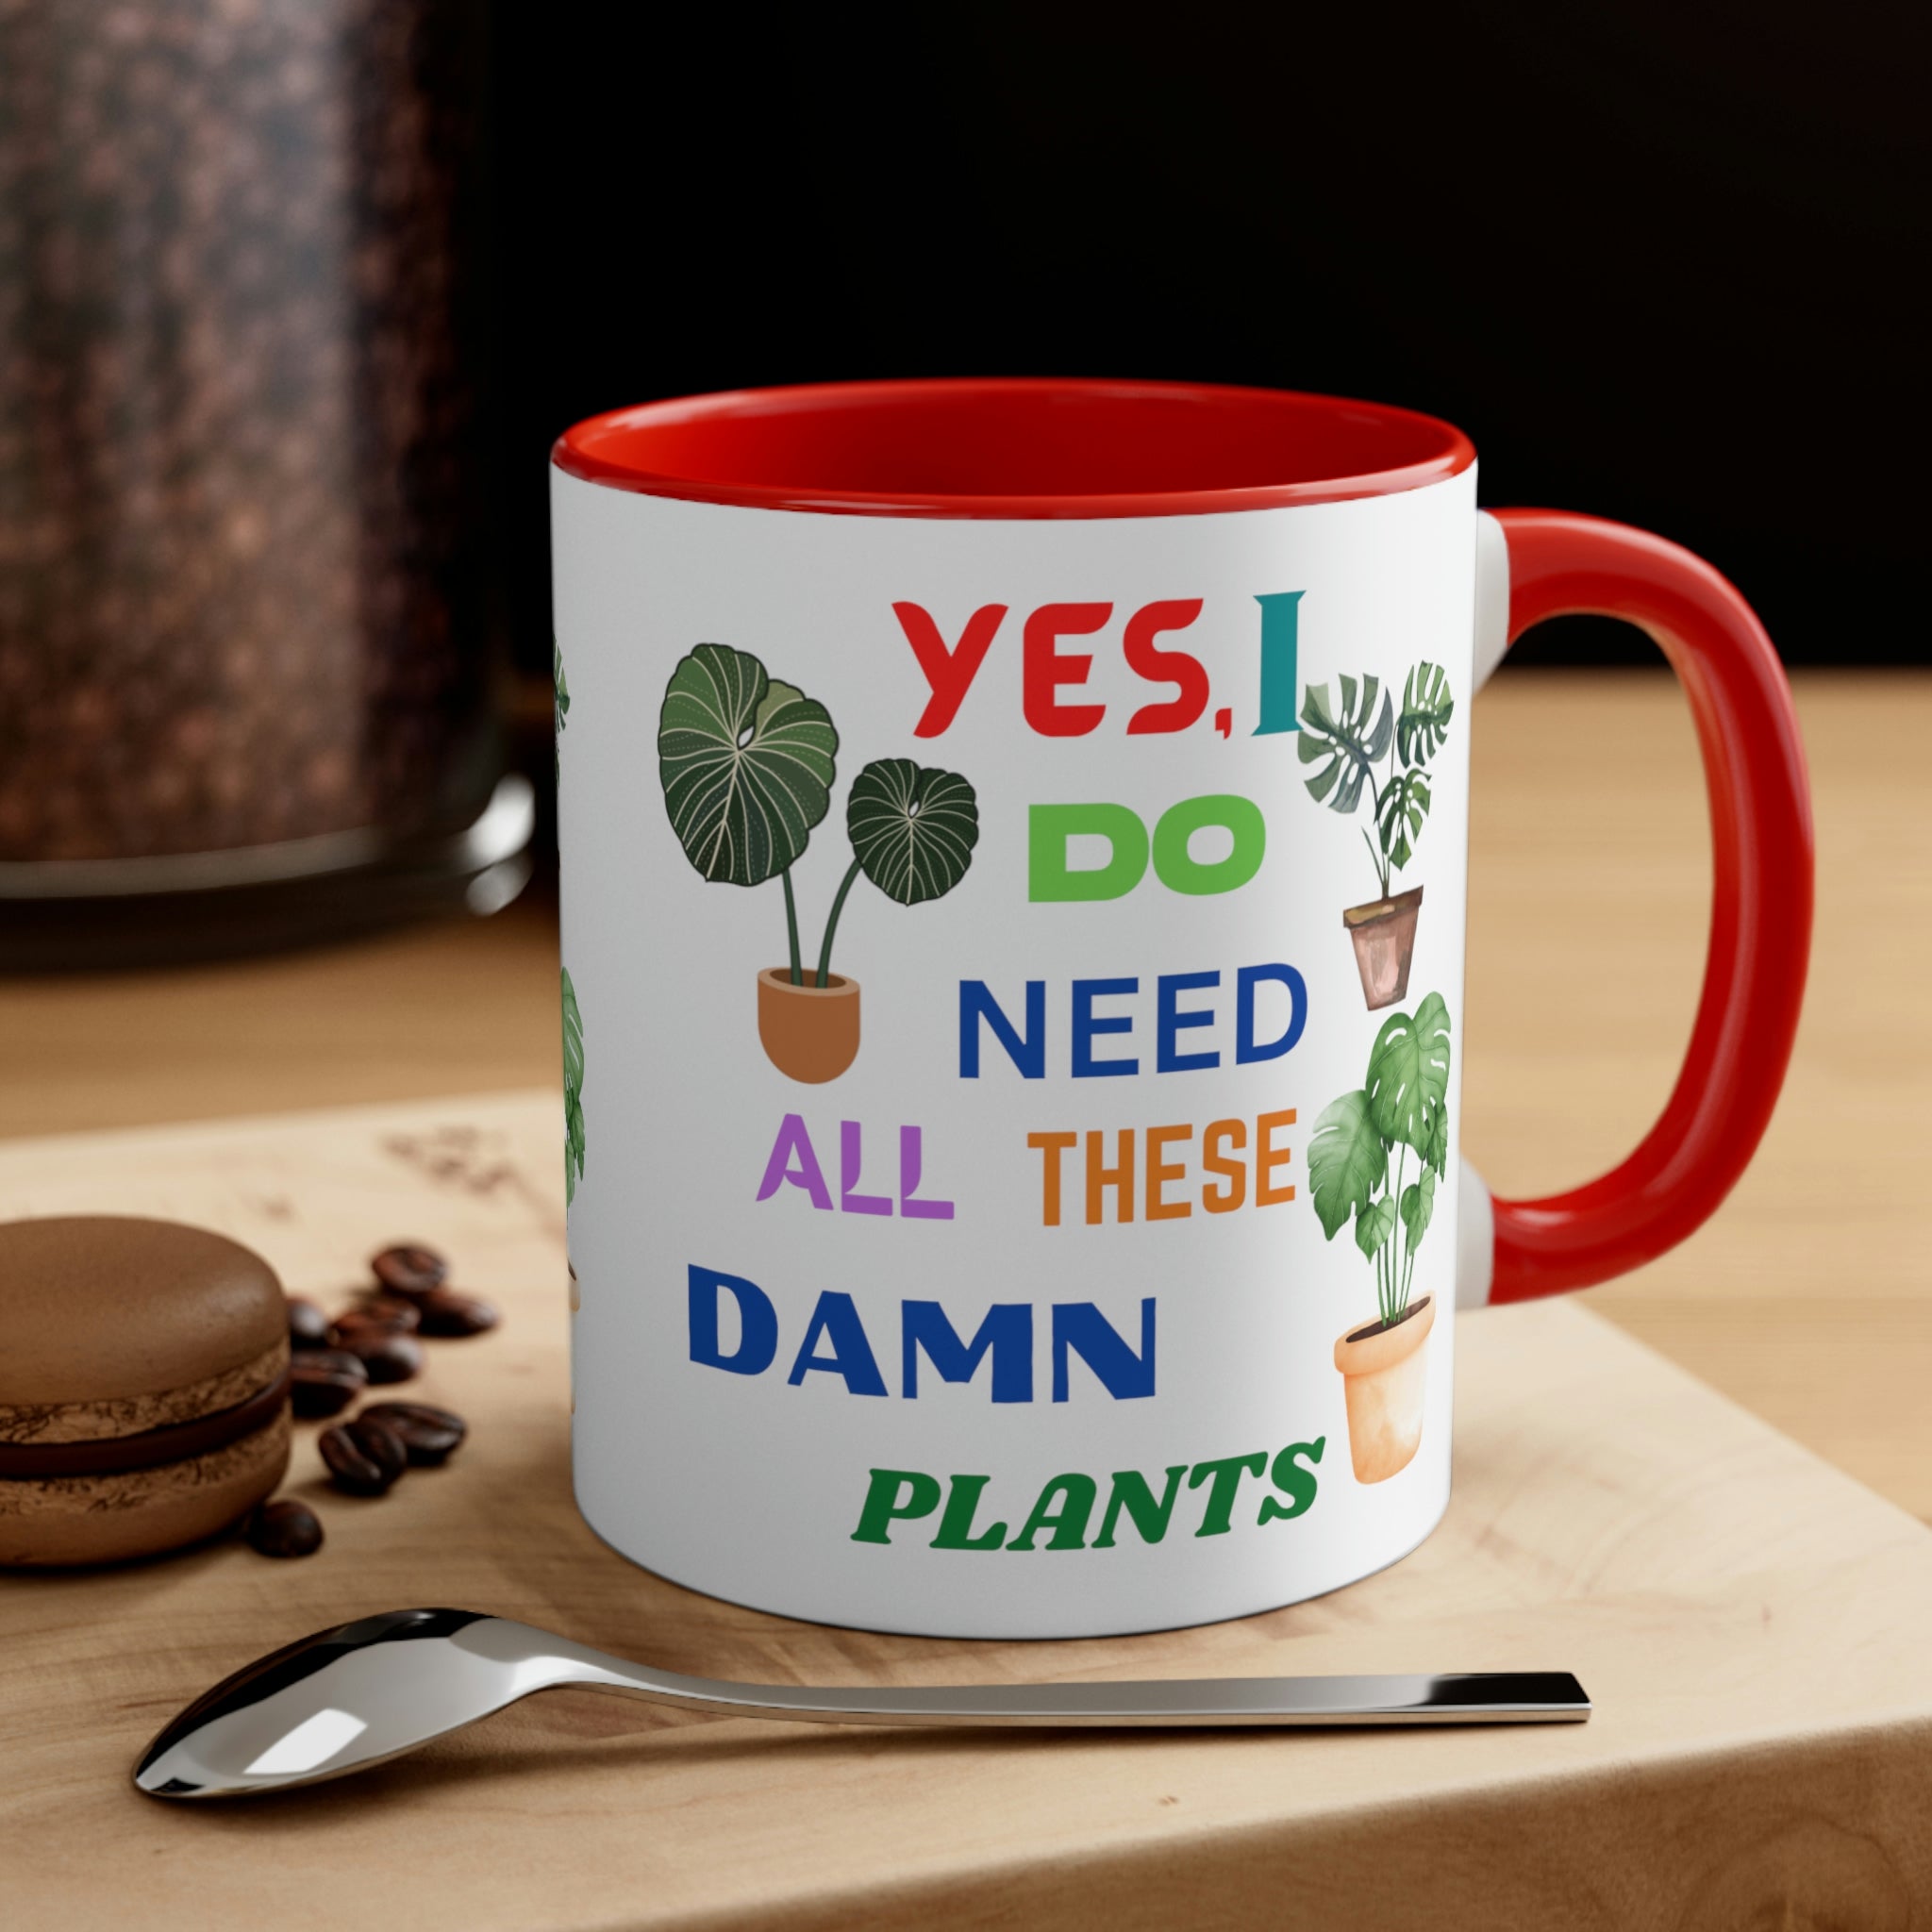 "Yes, I DO NEED All These Damn Plants" Accent Coffee Mug, 11oz - SHOP LUV FARMS